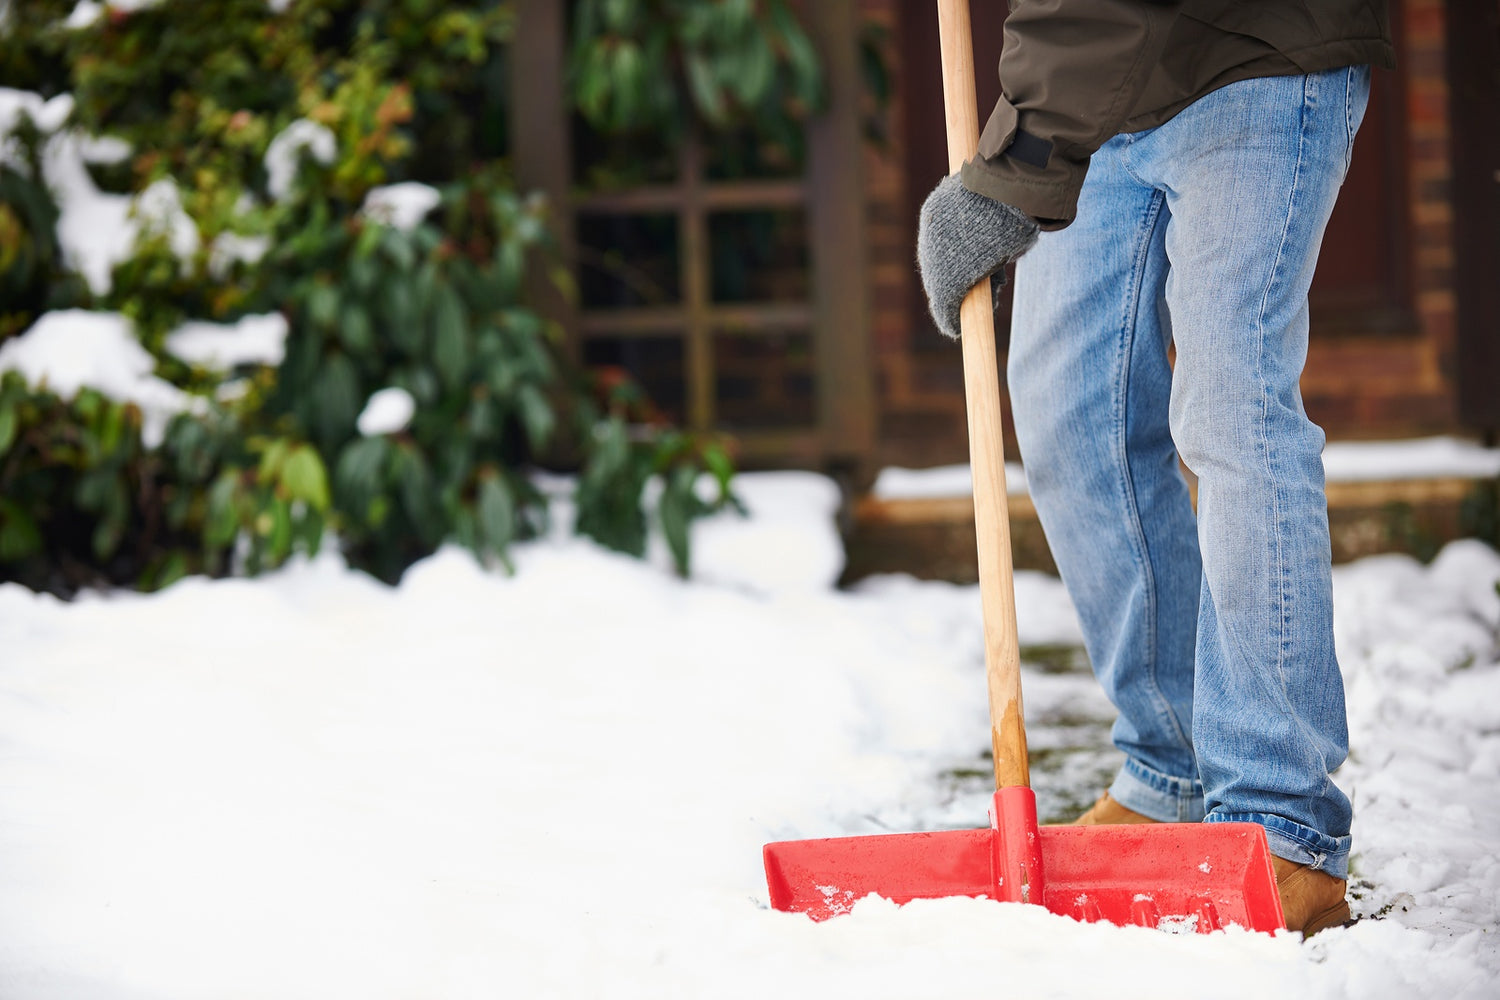 Here's the scoop on devices that ease burden of snow removal